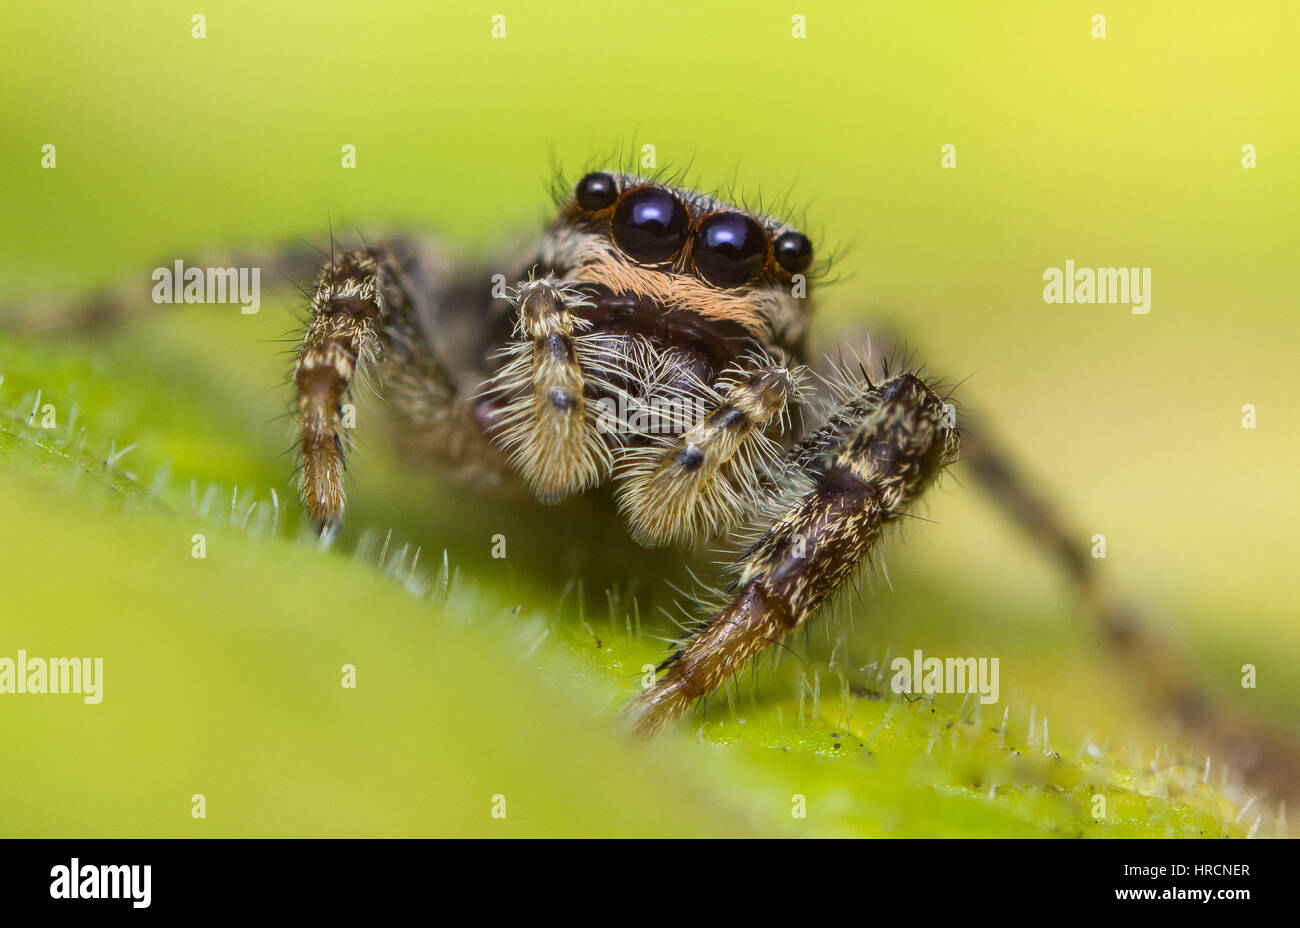 Close-up of a jumping spider on a leaf Stock Photo